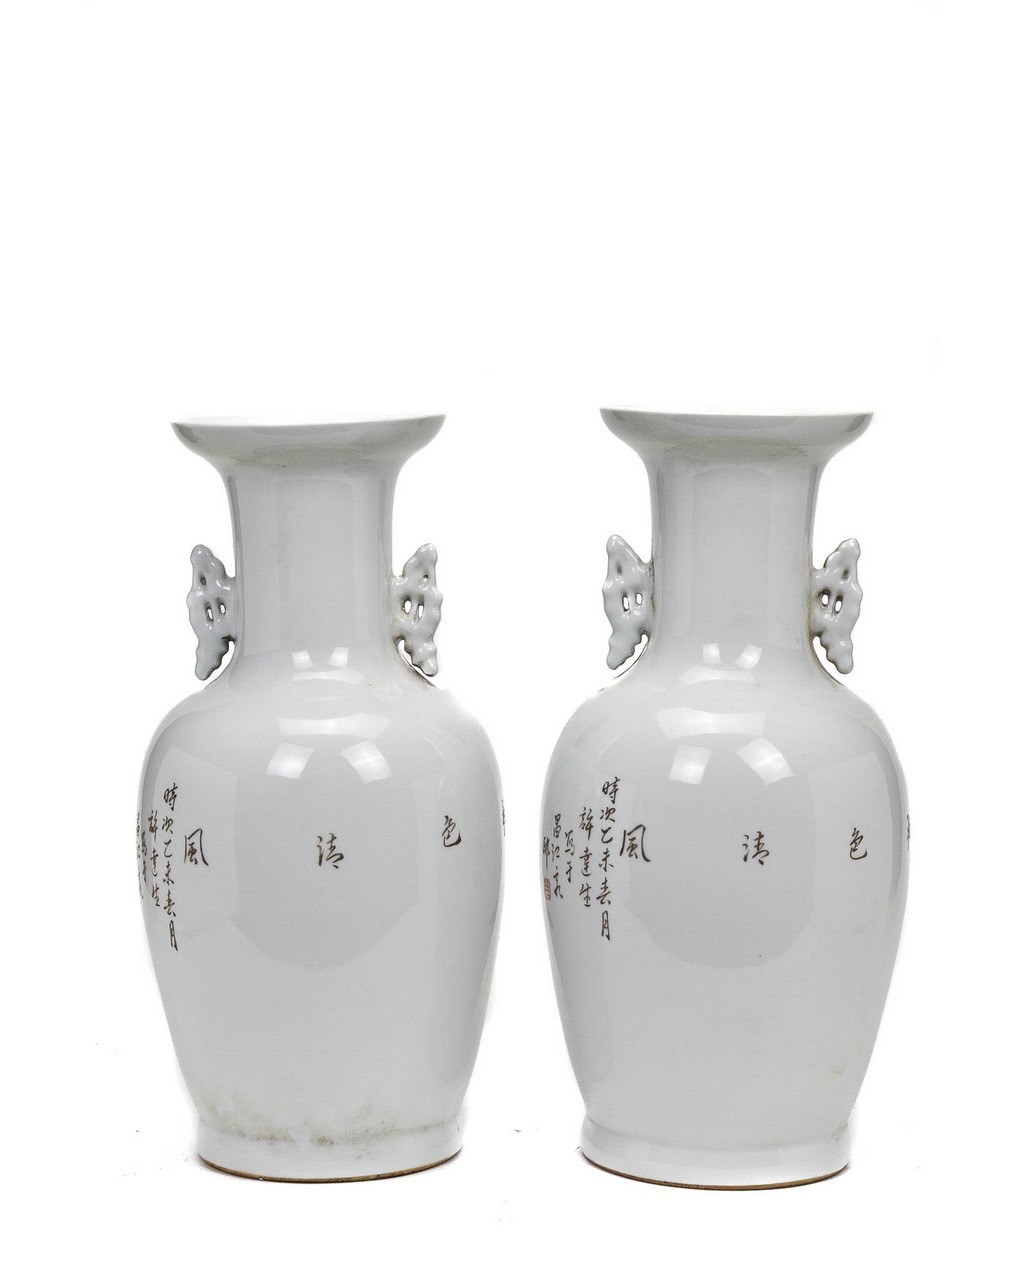 PAIR OF LARGE CHINESE PORCELAIN VASES - Image 3 of 9